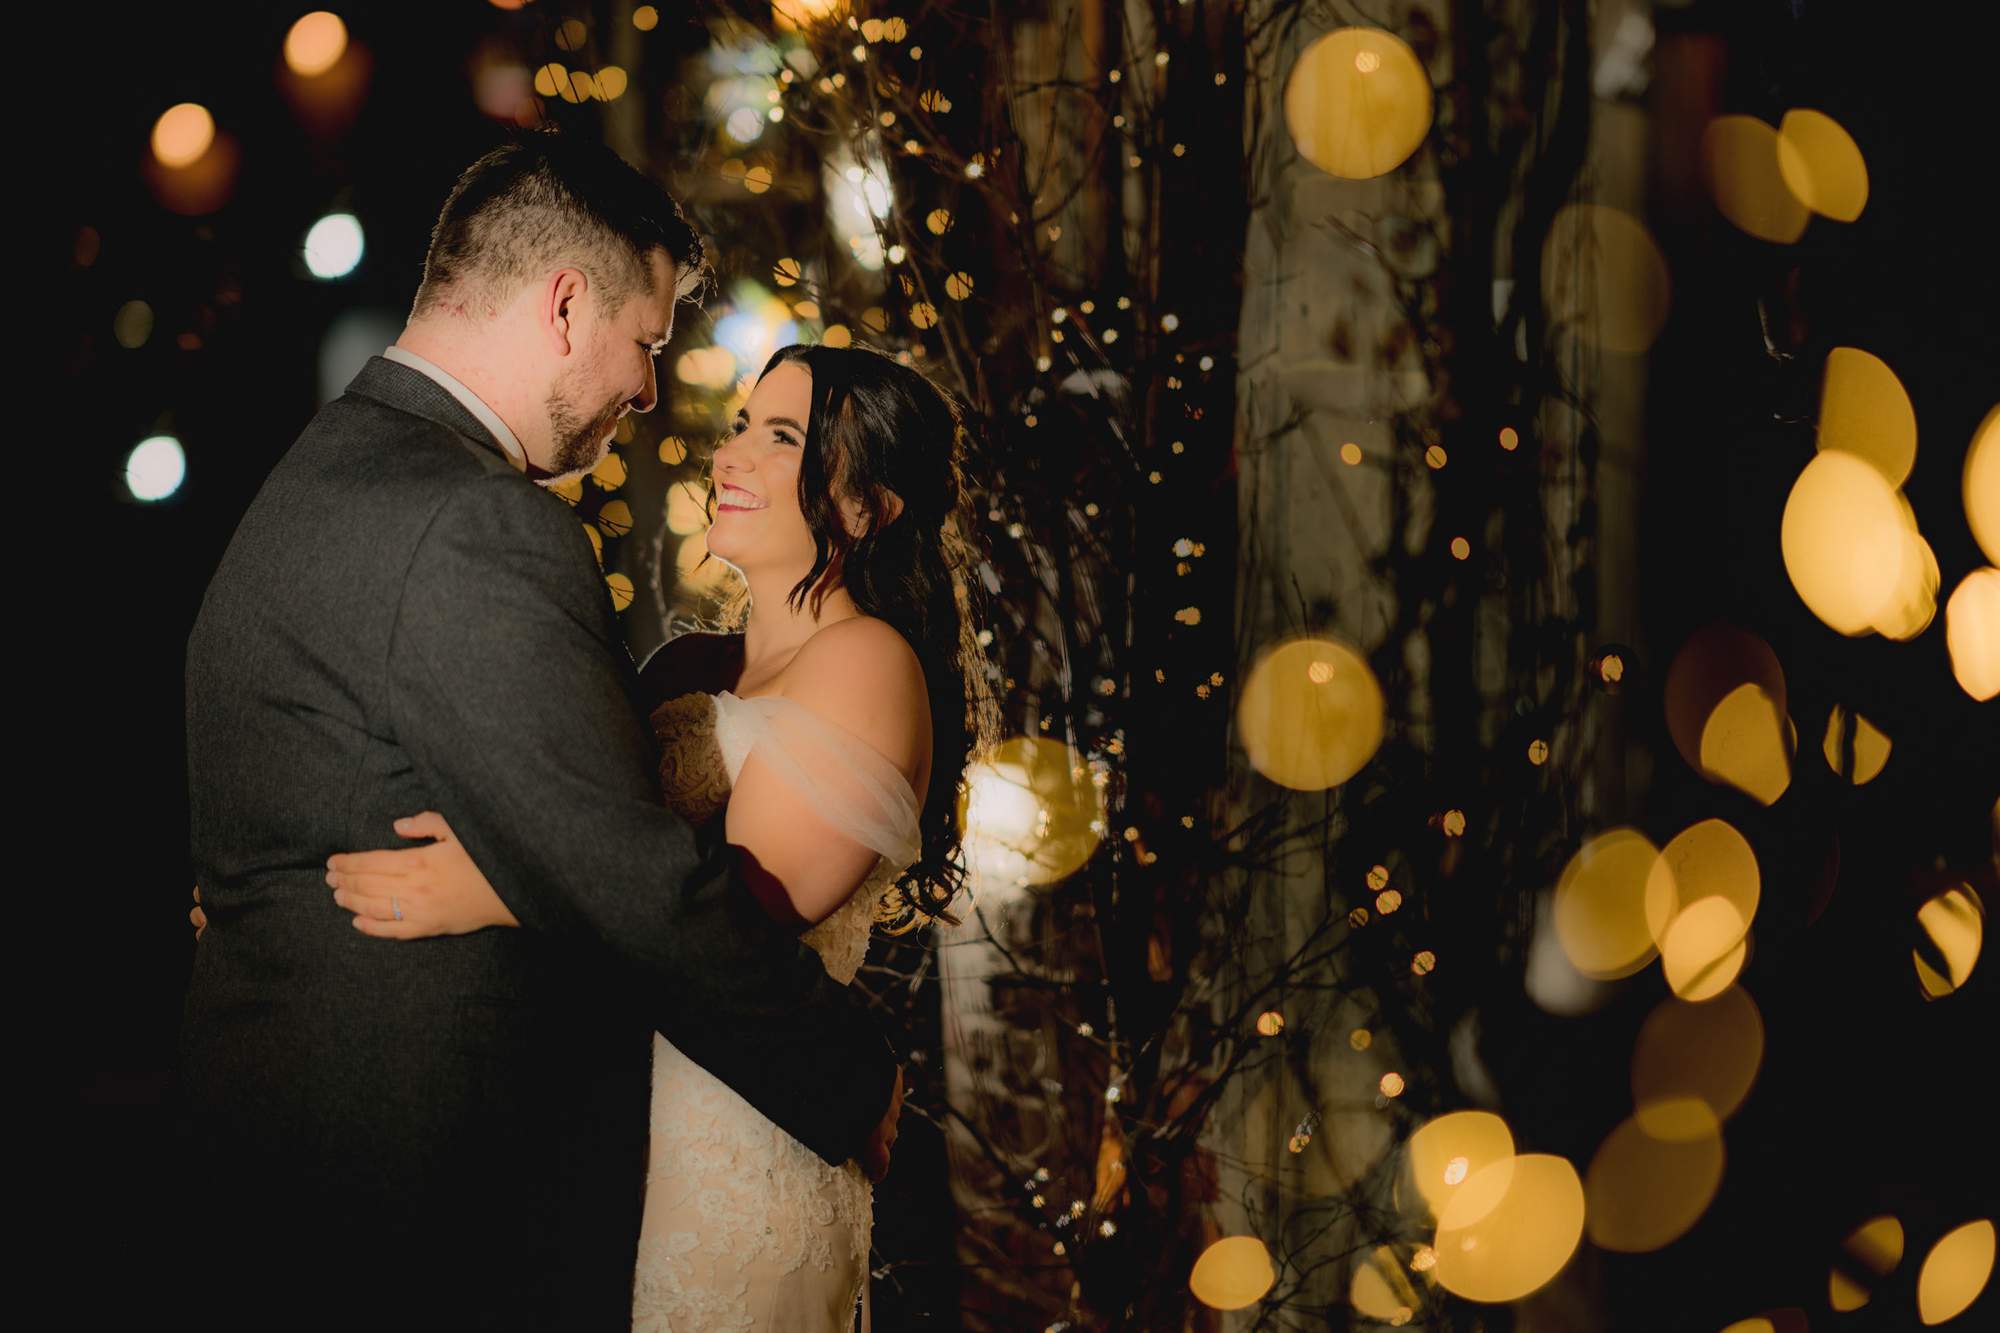 Bride and groom share a moment amongst a sea of twinkling fairly light for their magical Christmas wedding in Arundel.